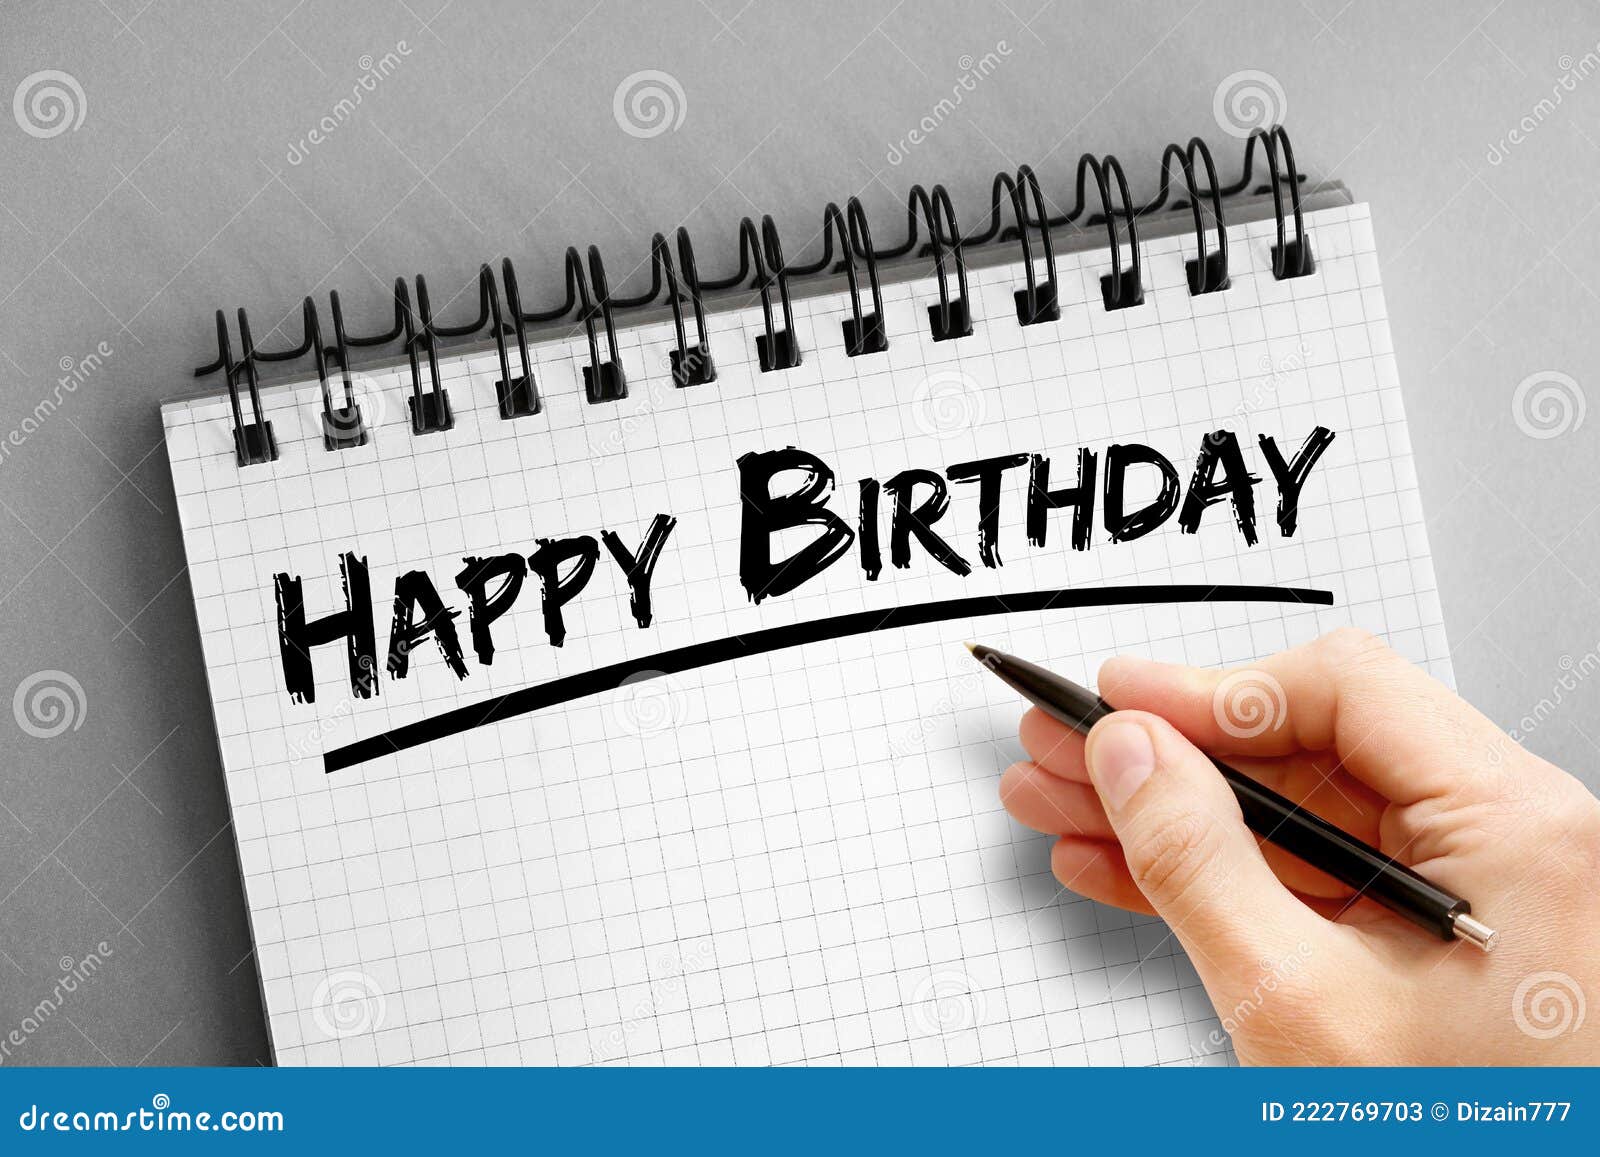 Happy Birthday Text on Notepad, Concept Background Stock Image - Image ...